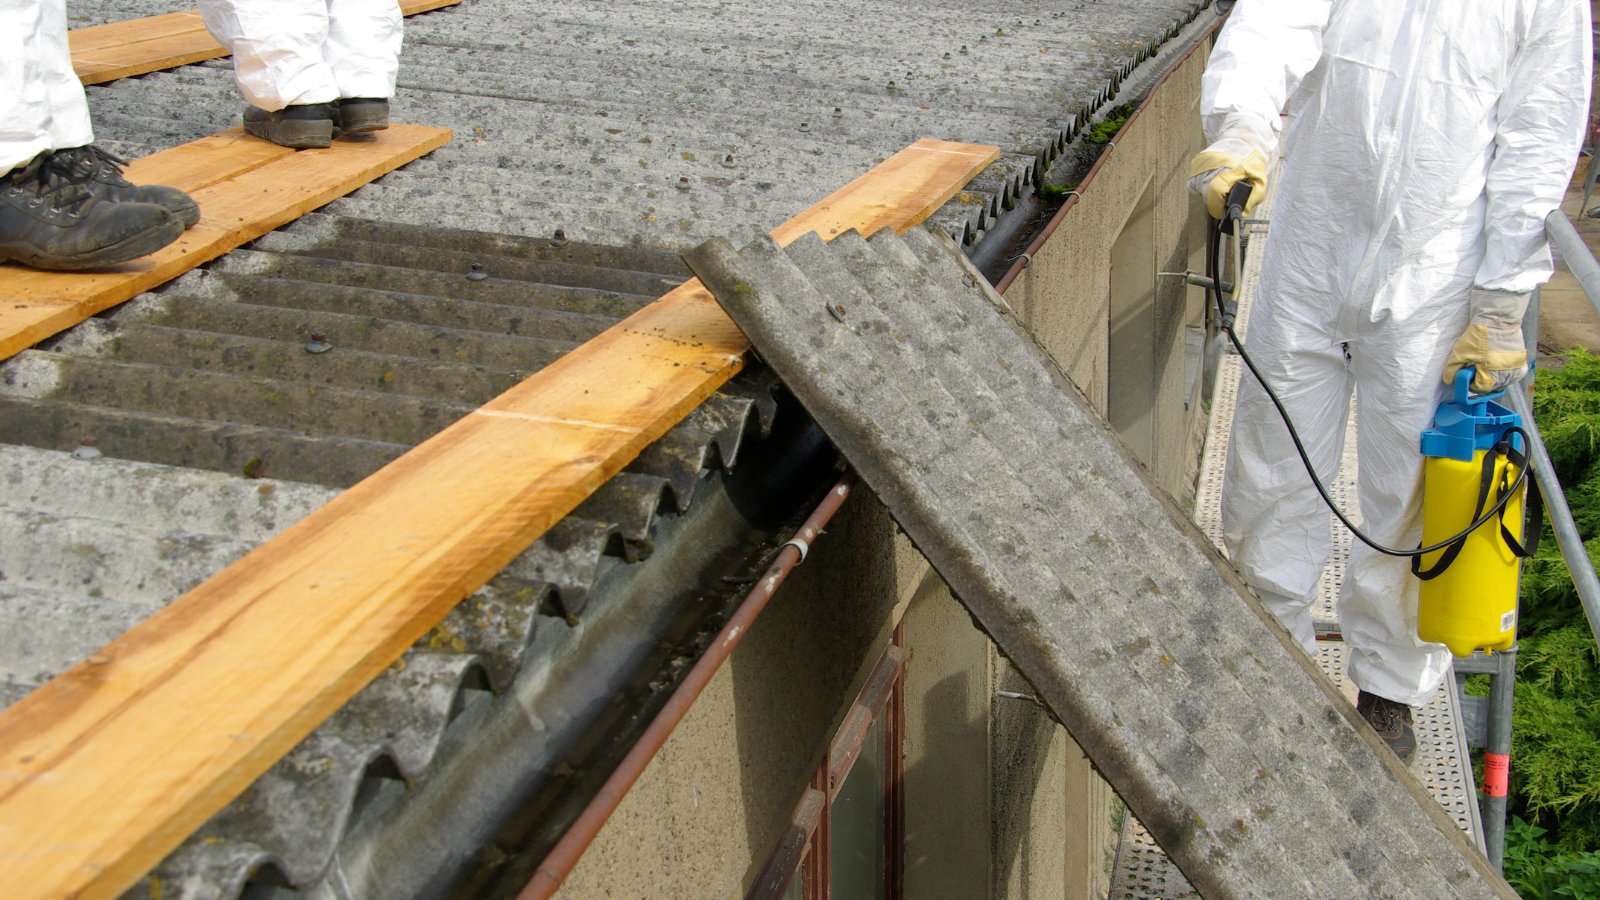 Asbestos roofing materials being removed